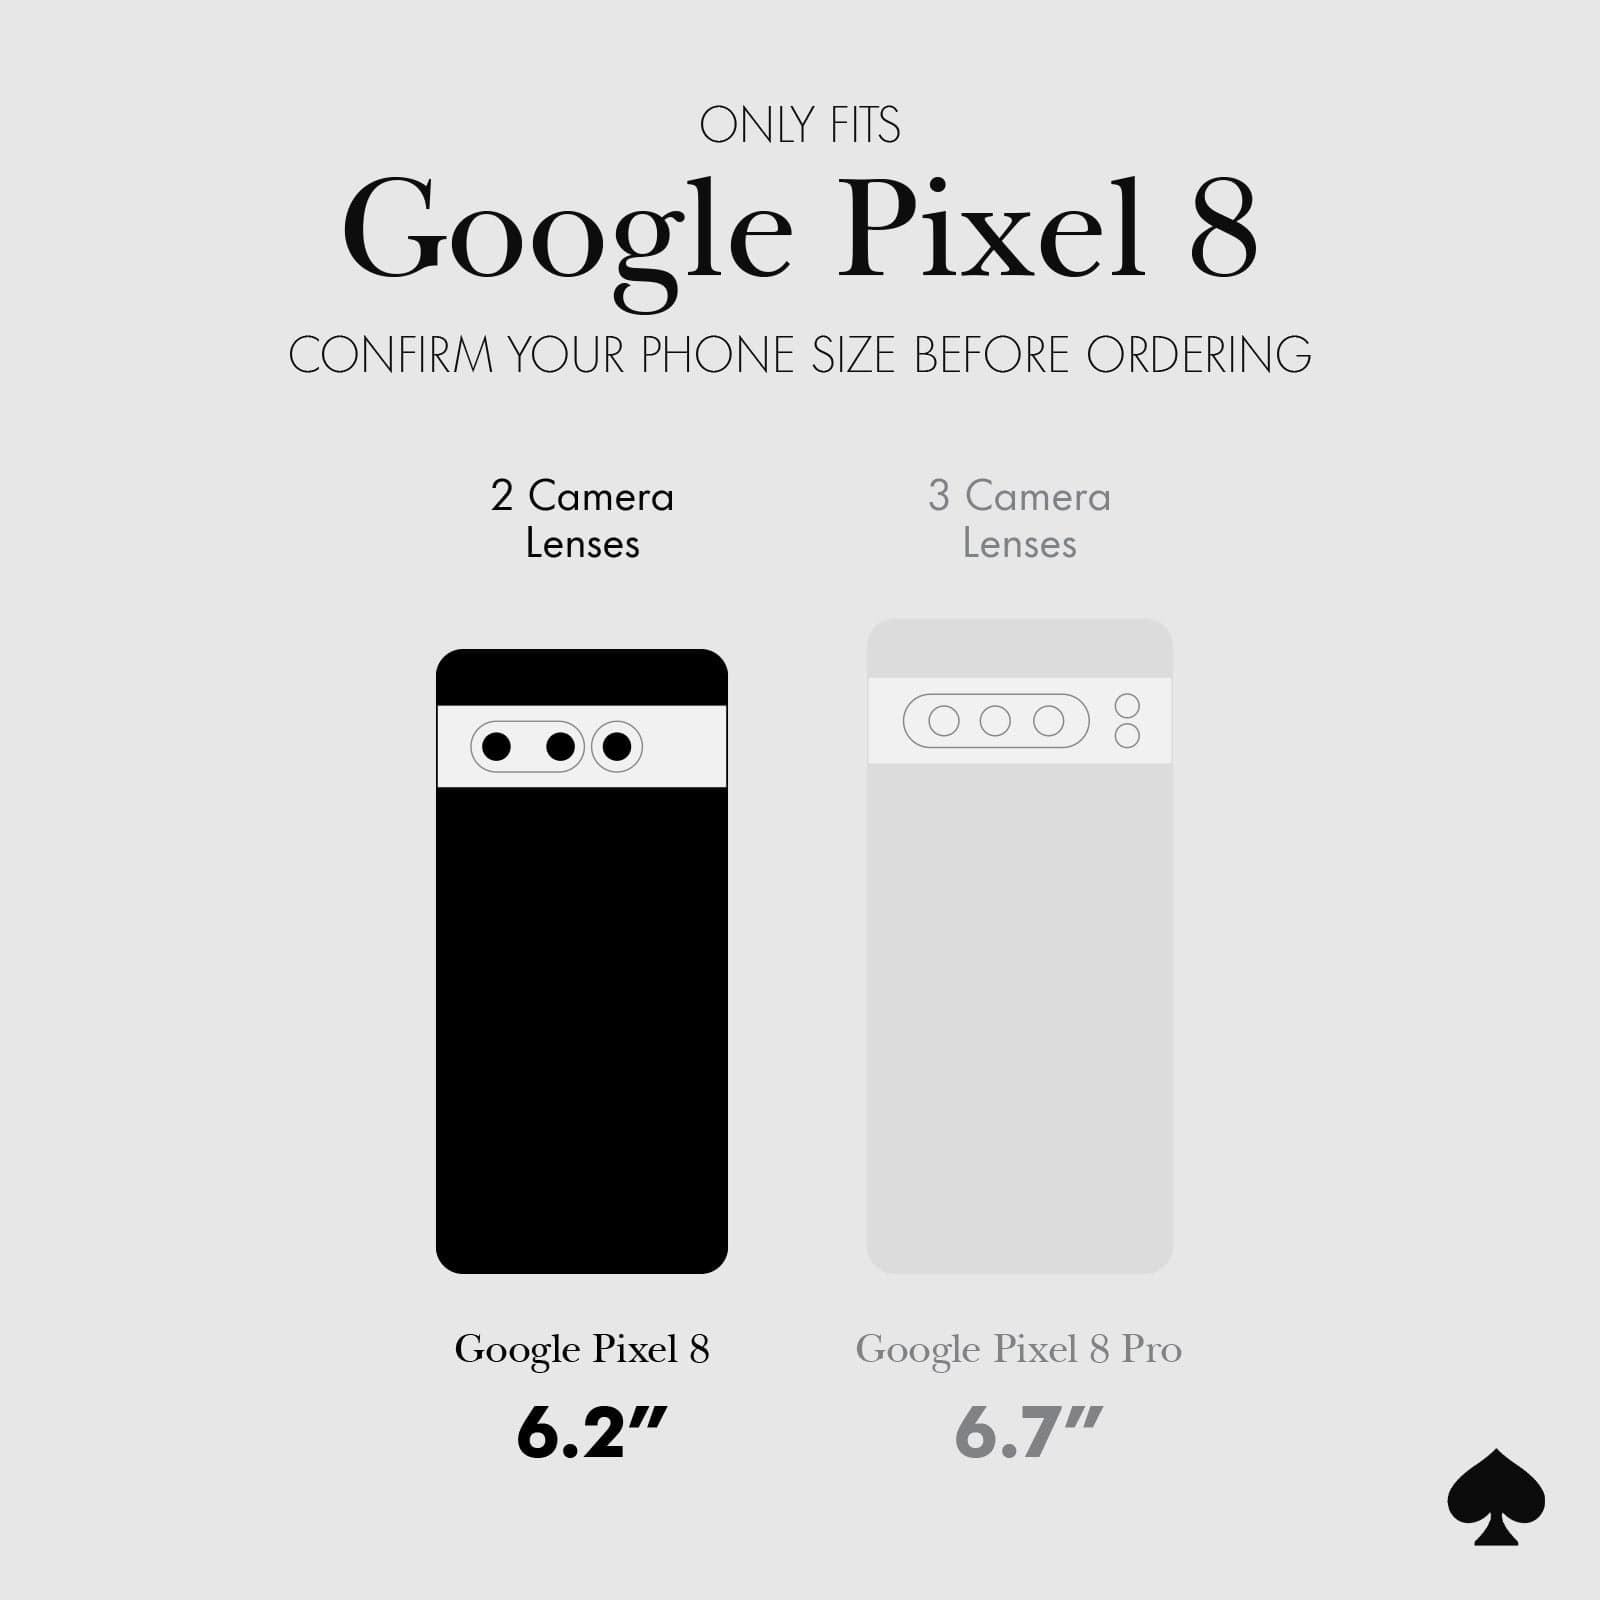 ONLY FITS GOOGLE PIXEL 8. CONFIRM YOUR PHONE SIZE BEFORE ORDERING